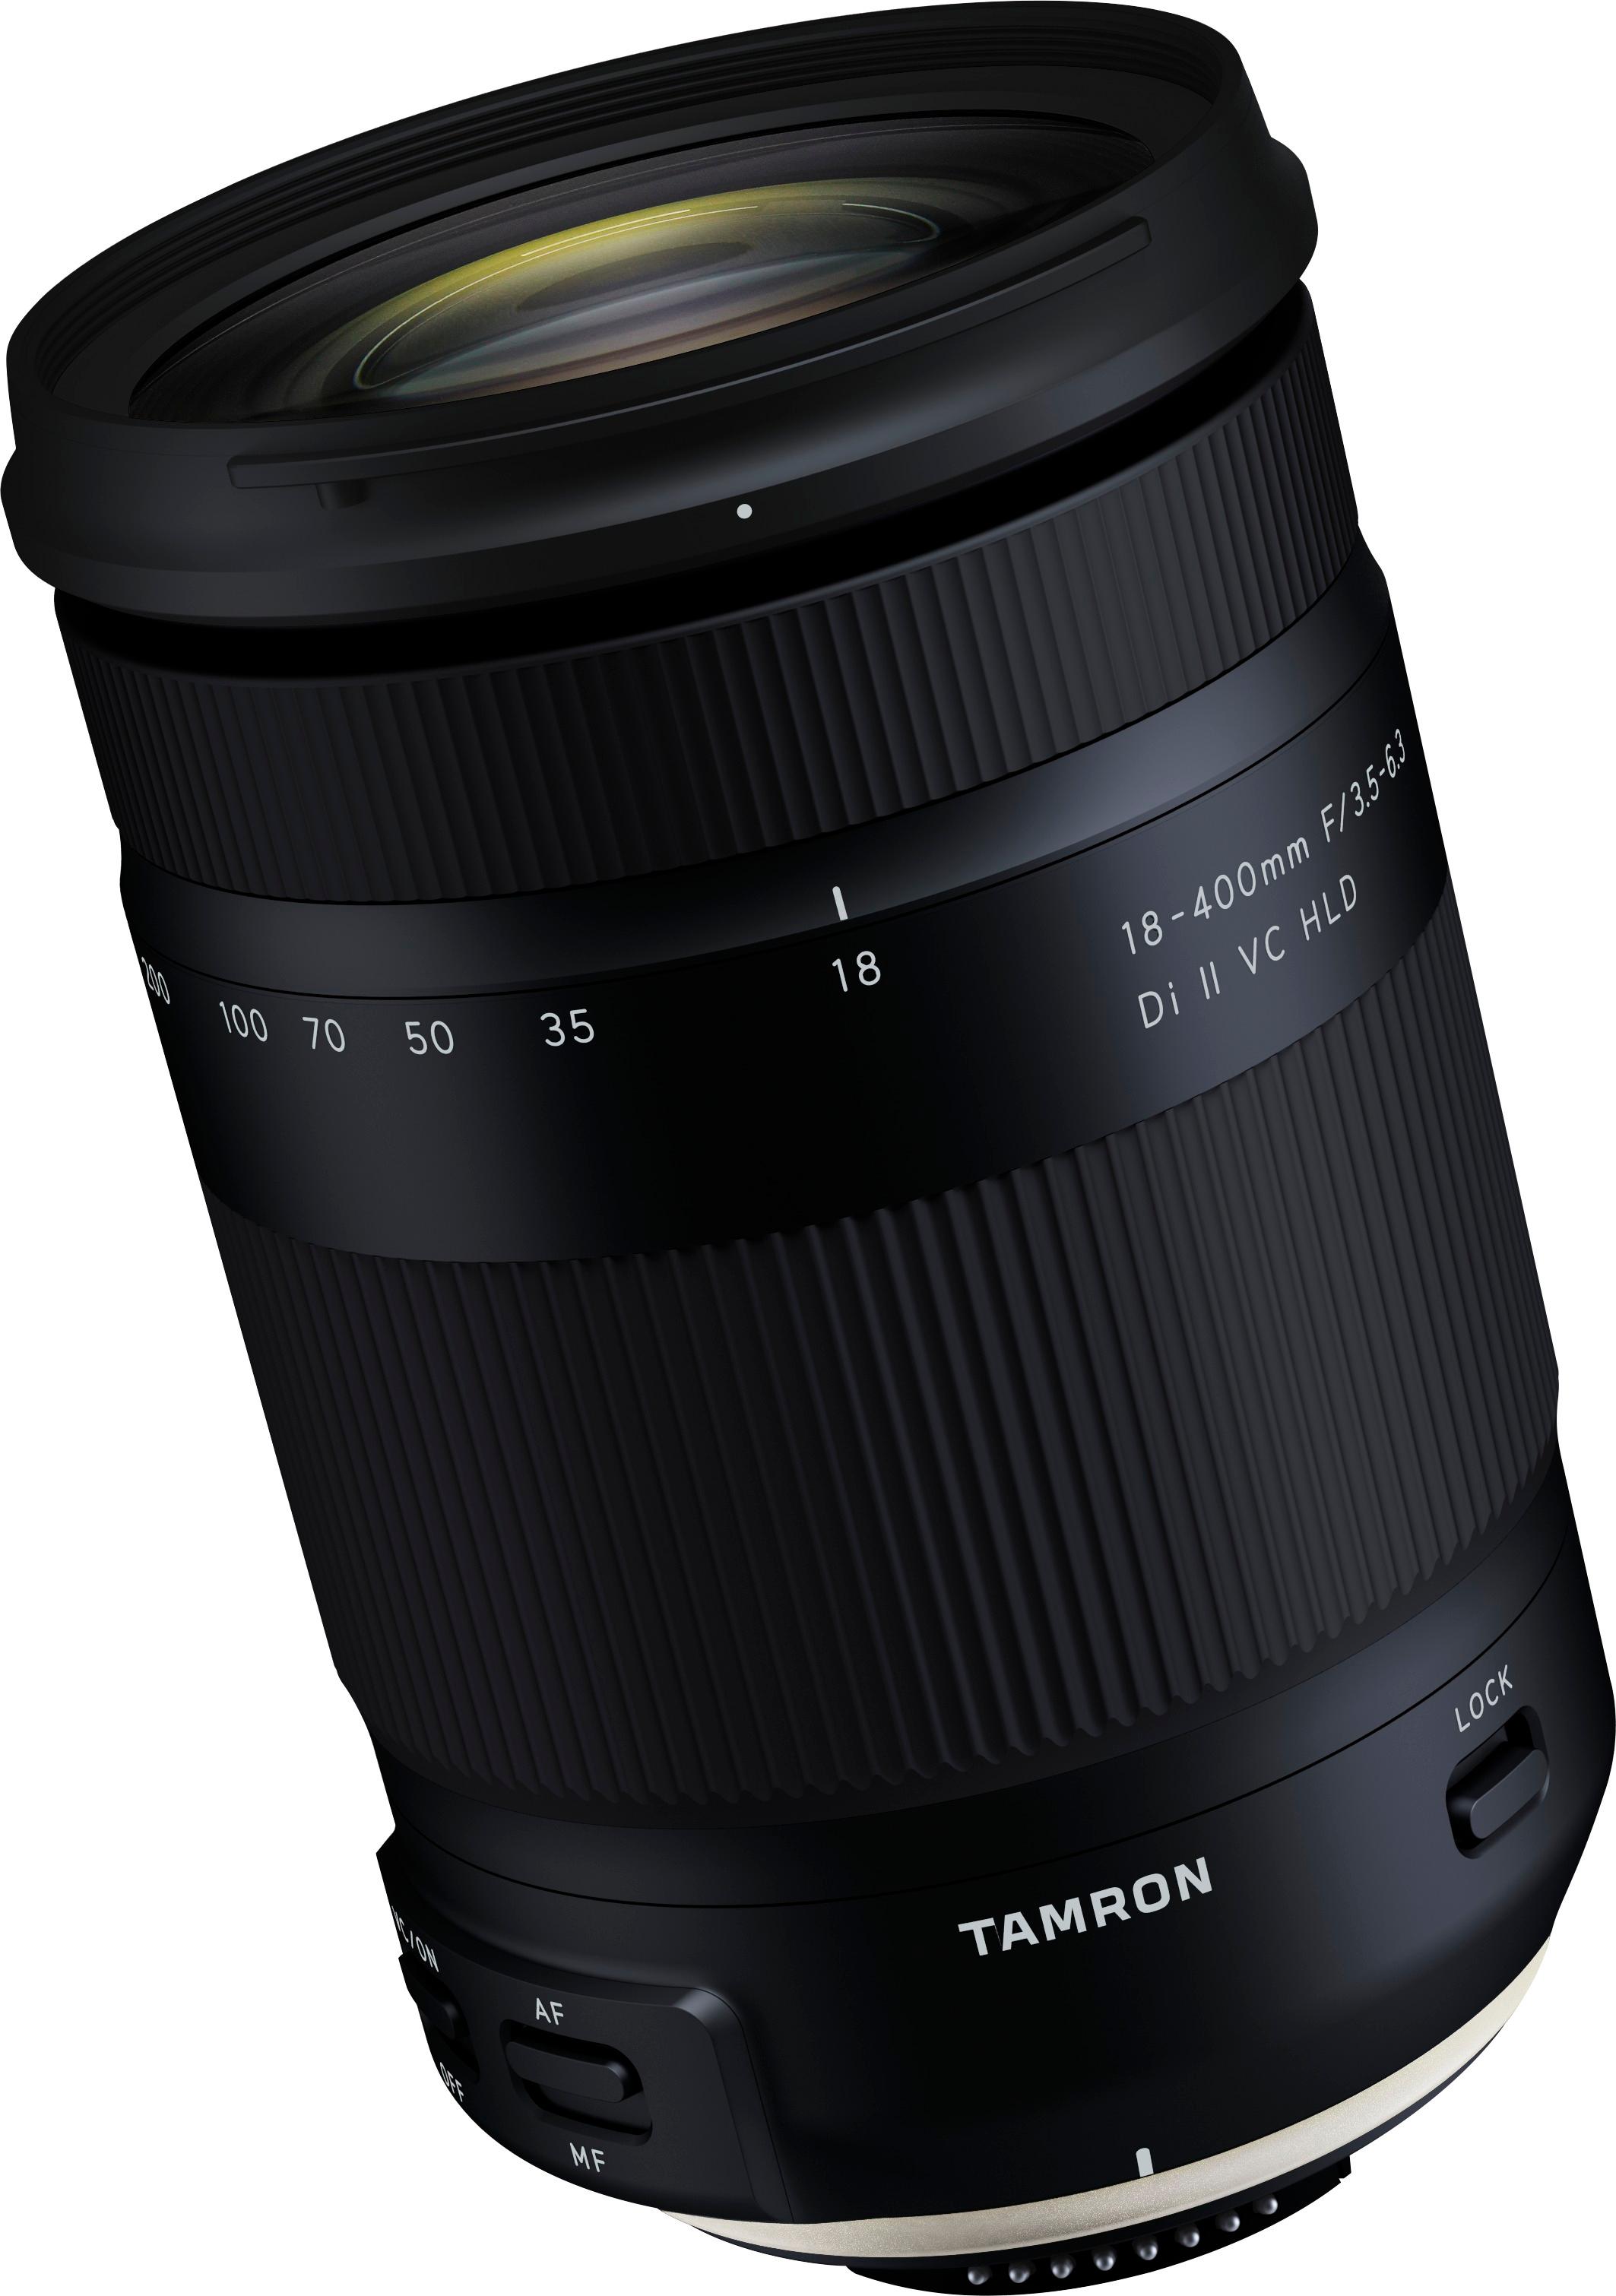 Tamron 18-400mm F/3.5-6.3 Di II VC HLD All-In-One Telephoto Lens